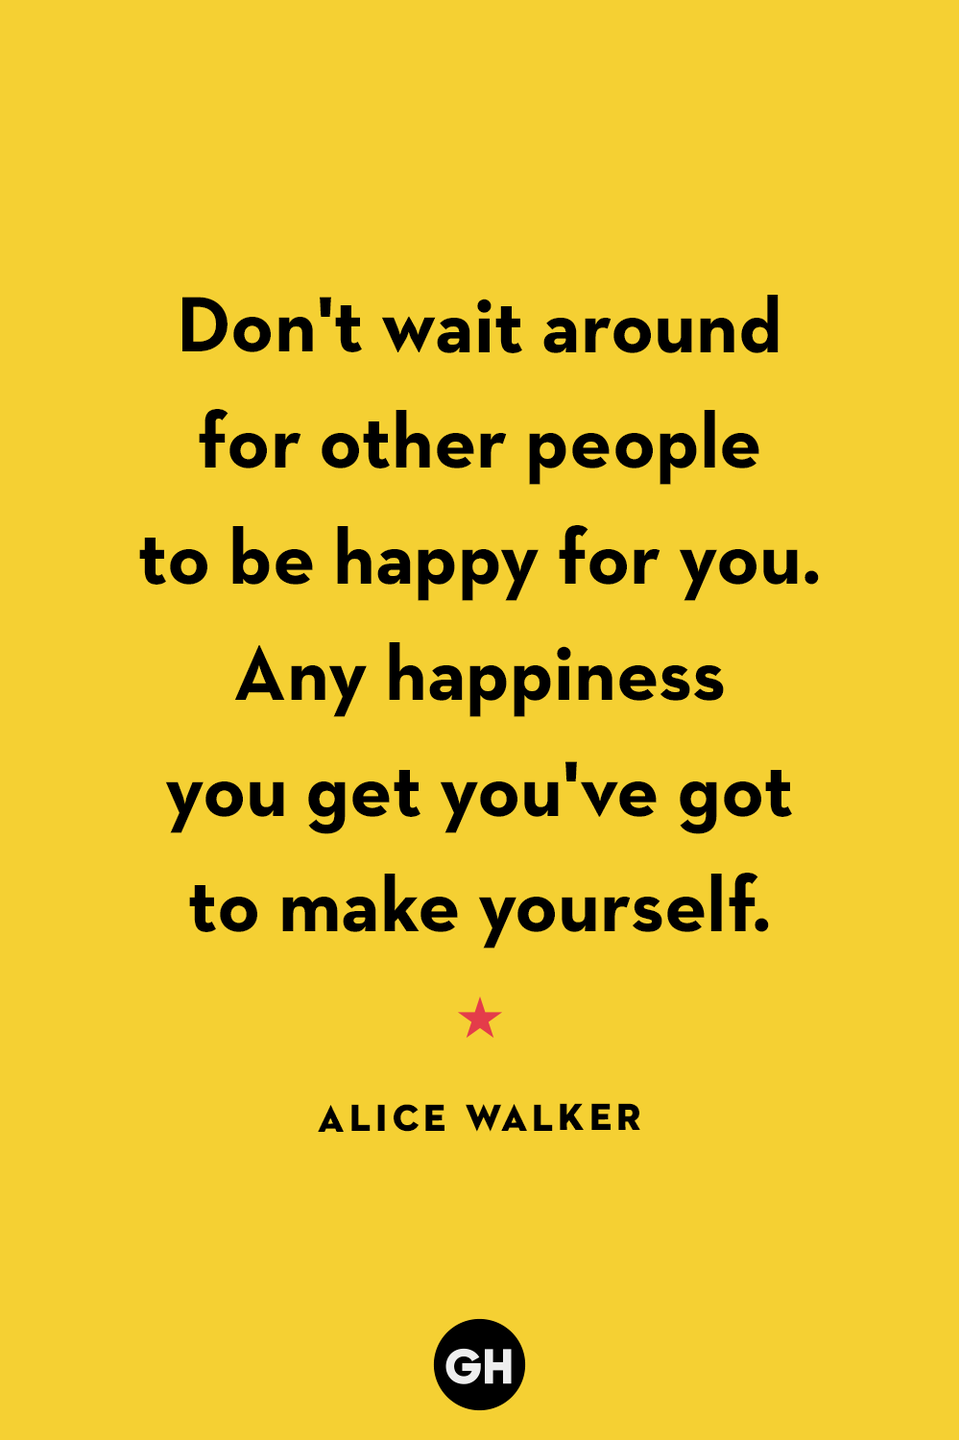 <p>Don't wait around for other people to be happy for you. Any happiness you get you've got to make yourself.</p>